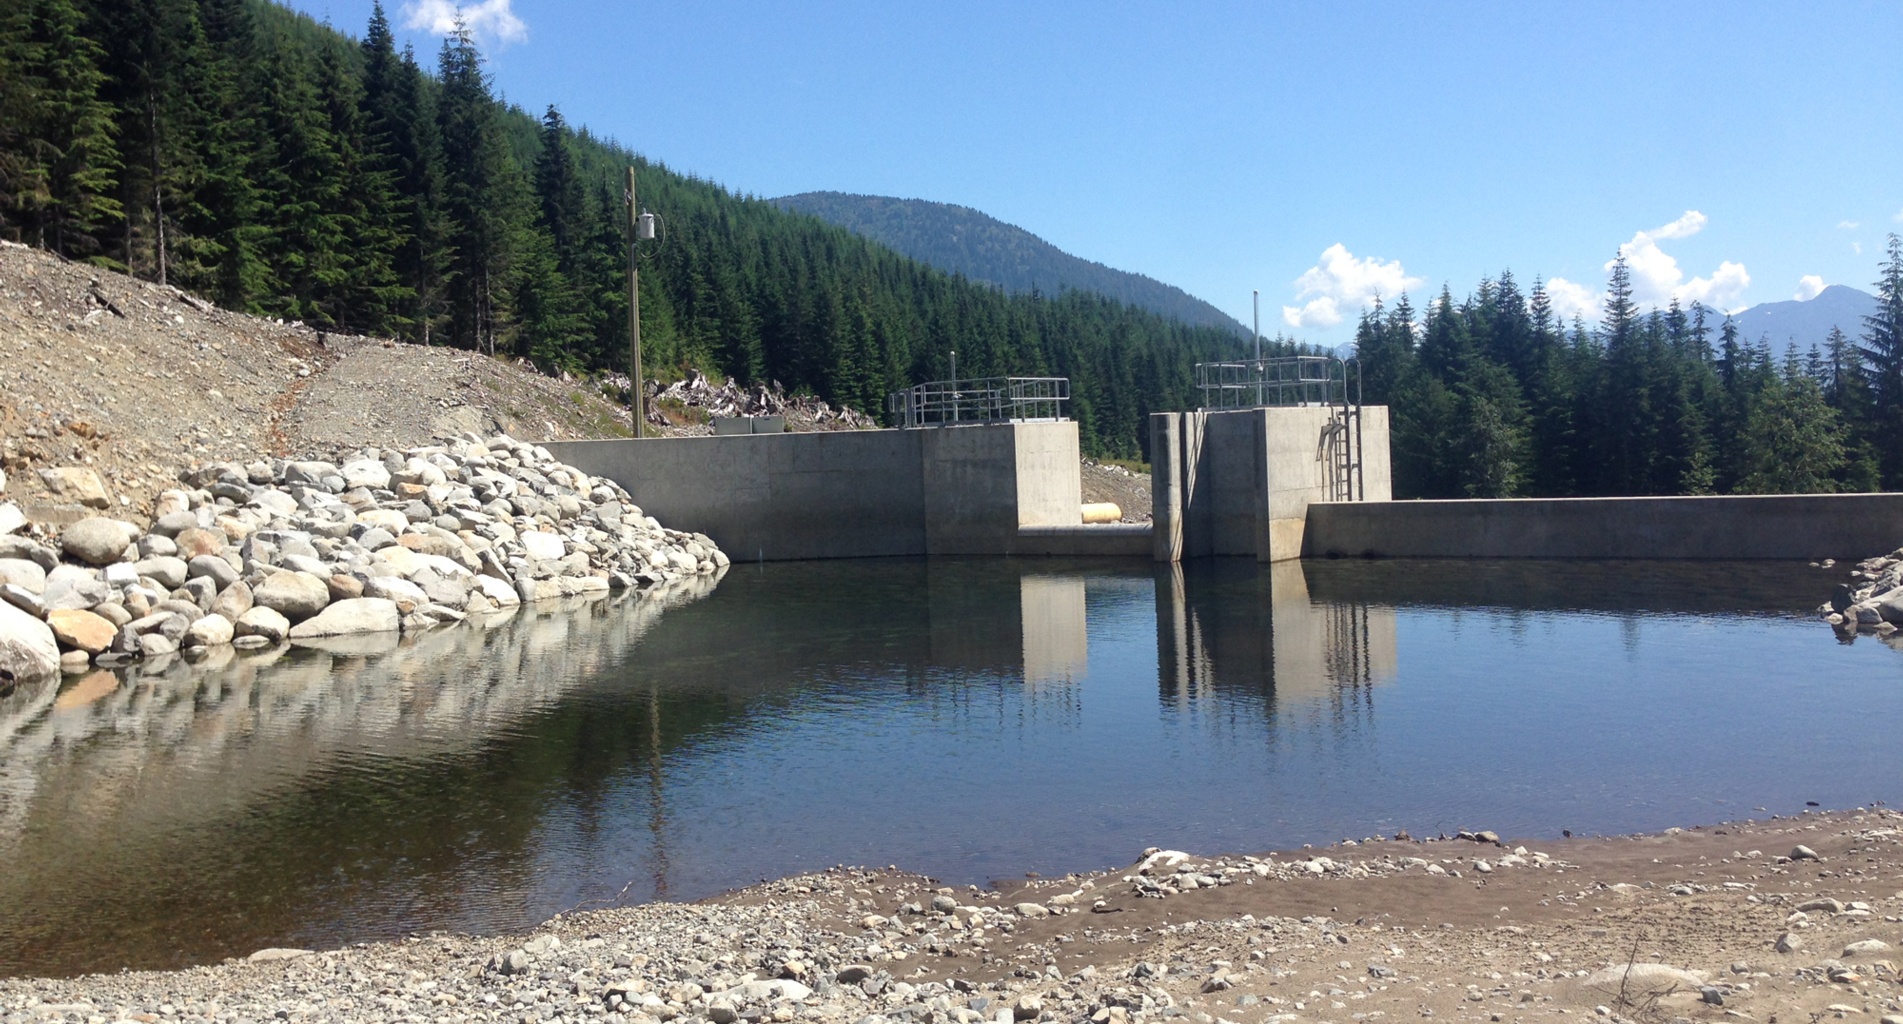 Box Canyon Hydroelectric Project Recognized with Award of Merit